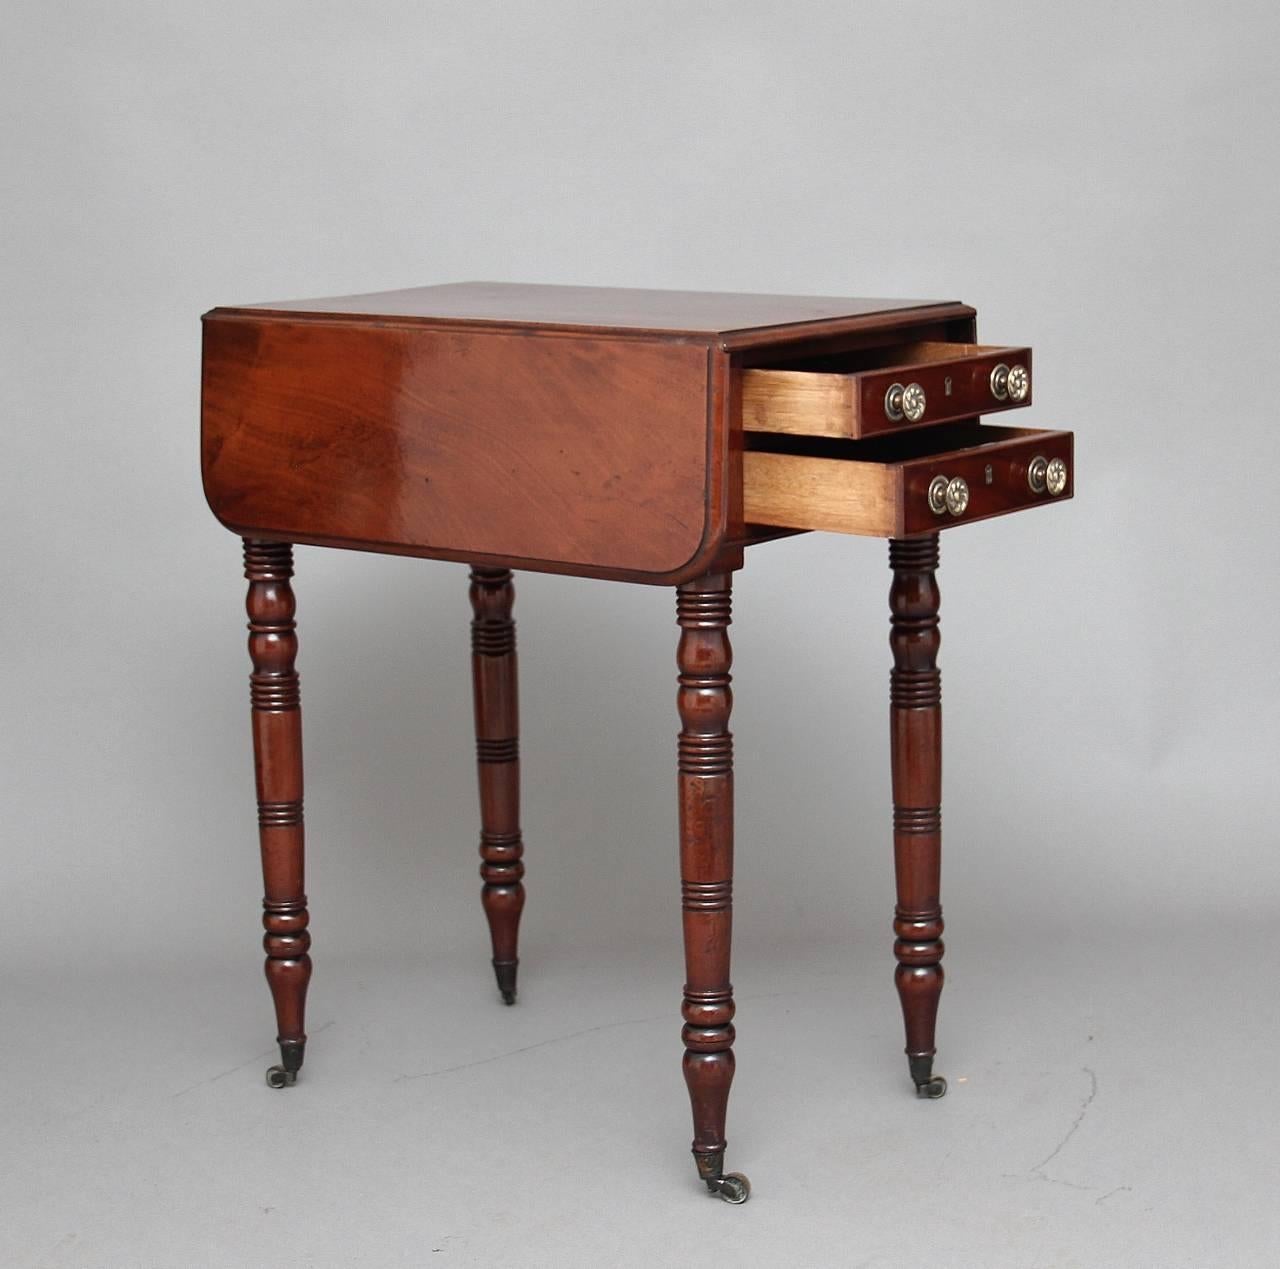 19th century mahogany drop-leaf or side table, the moulded edge top which extends to 28 1/2” (73cms), with two graduated oak lined drawers below with decorative brass turned knobs, the reverse of the table is exactly the same just with faux drawers,